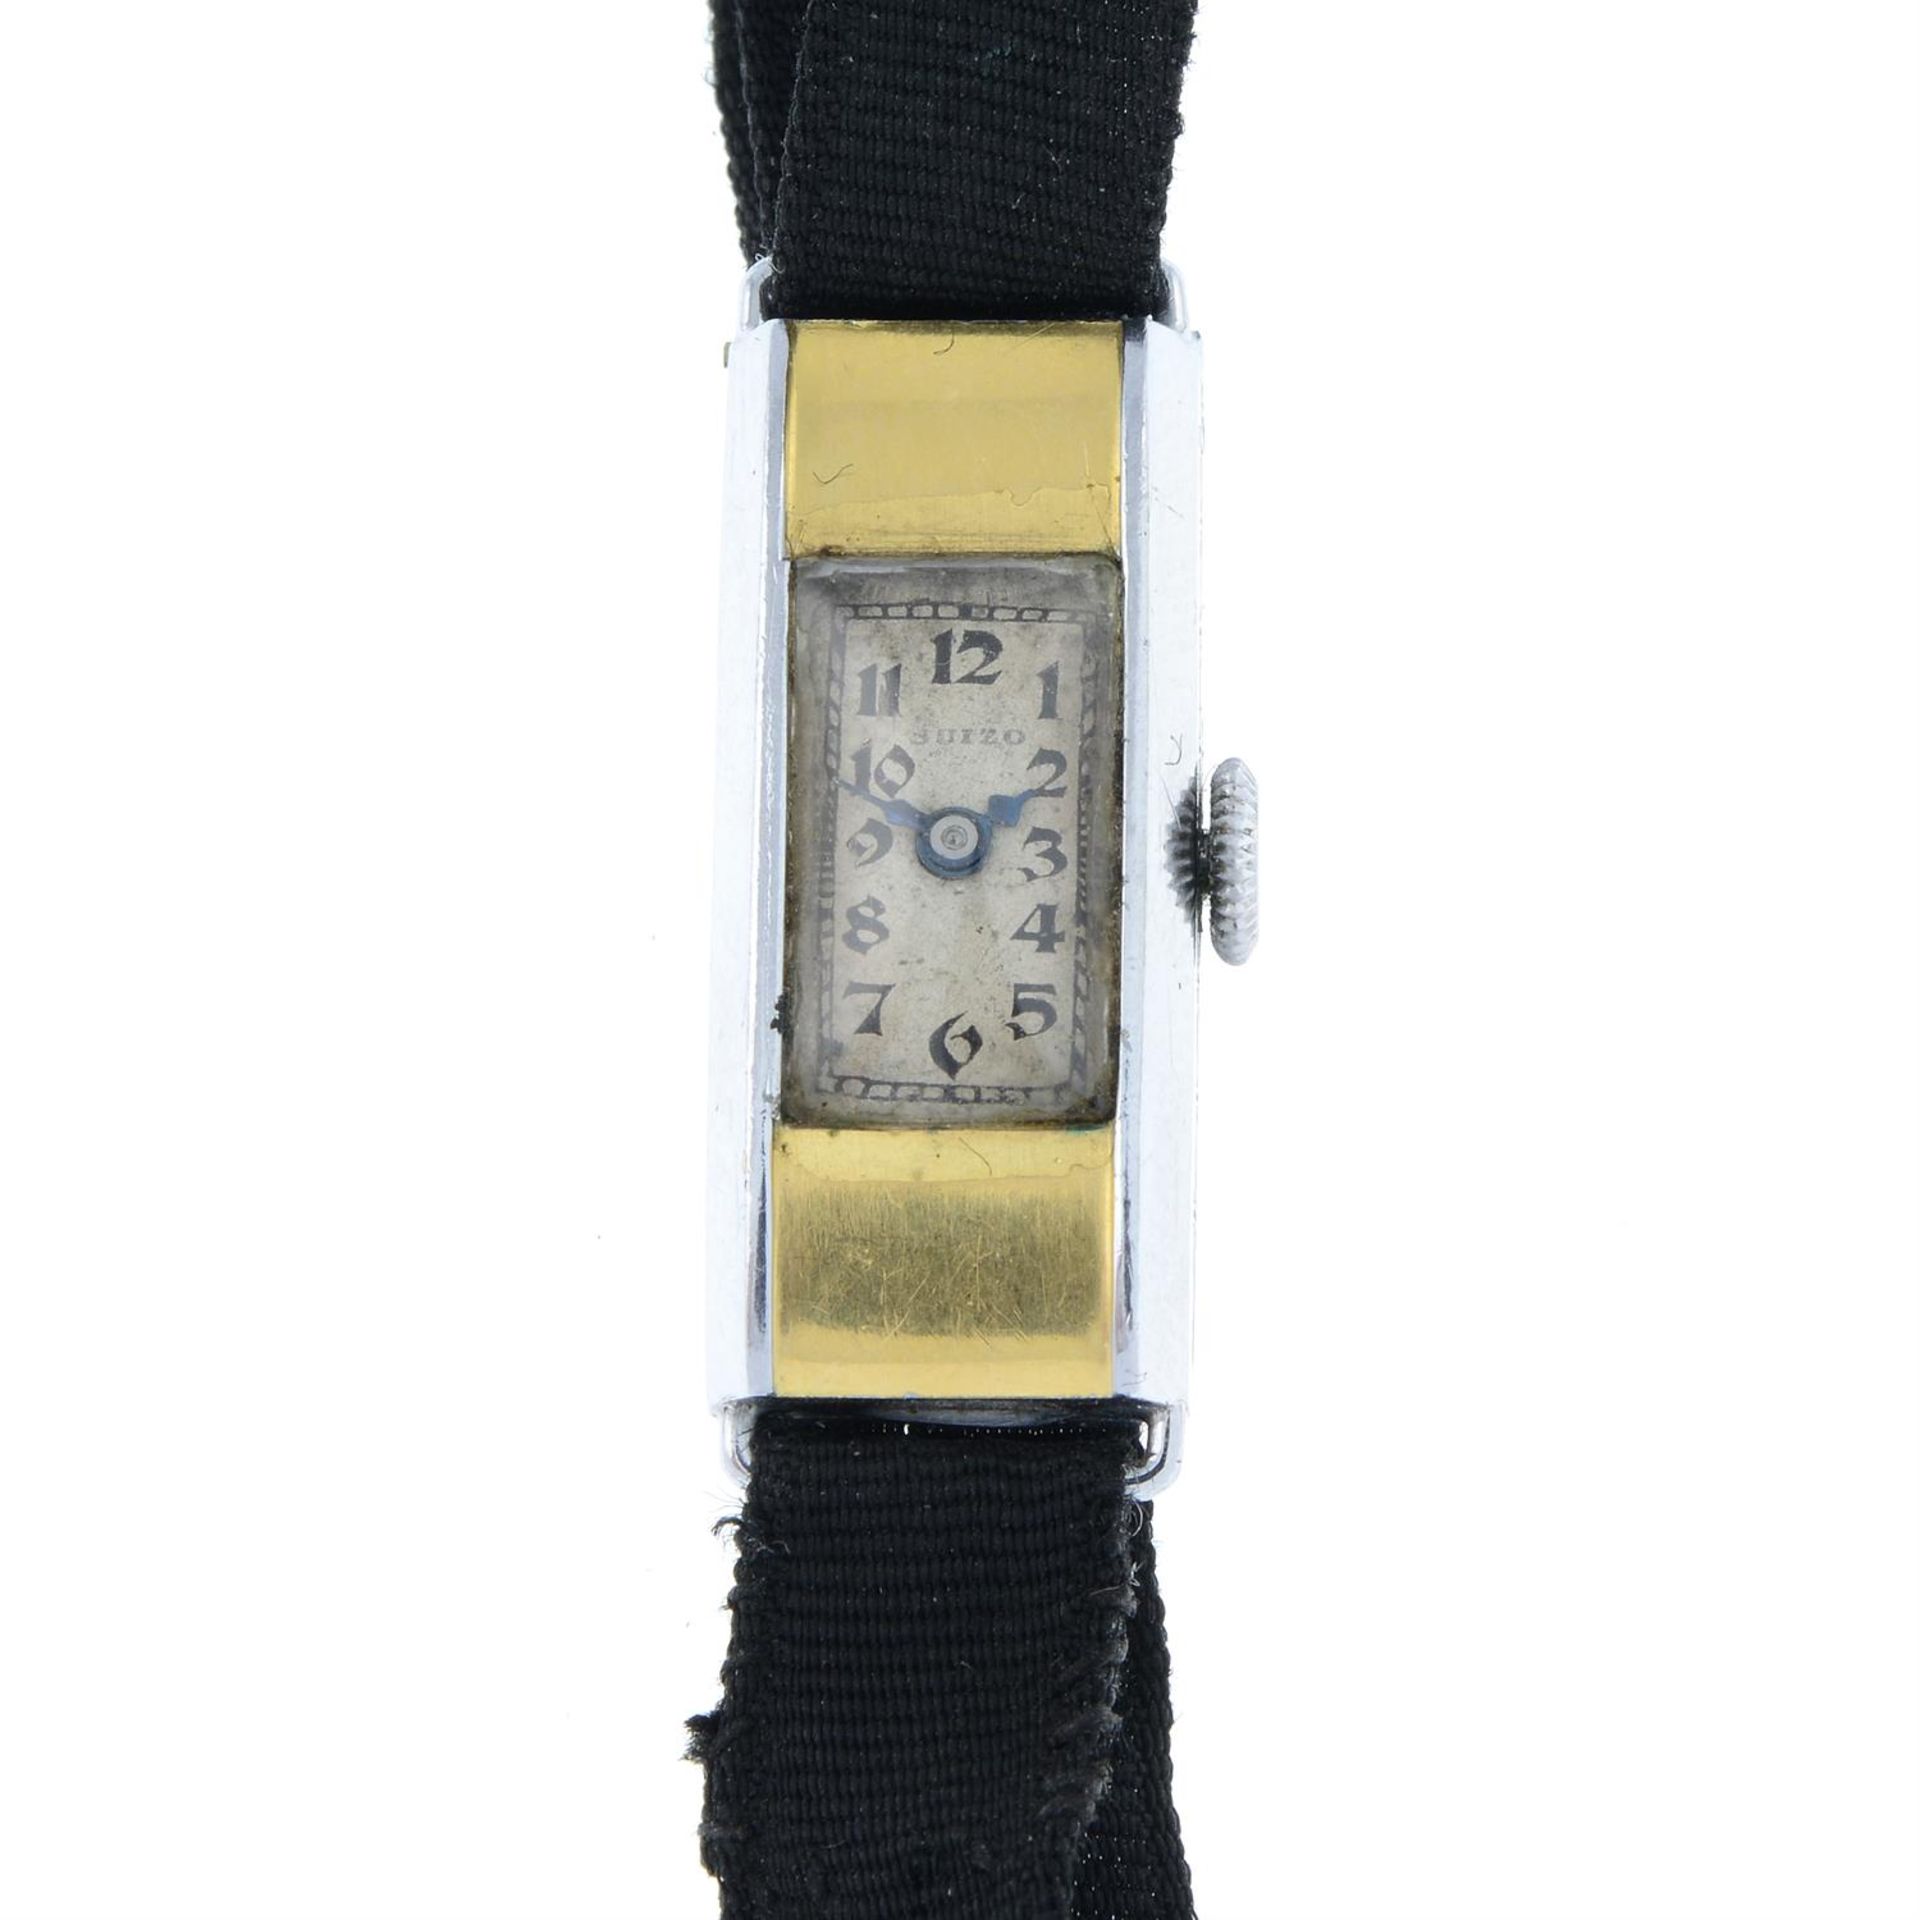 An early 20th century Chinese chrome plated wrist watch.